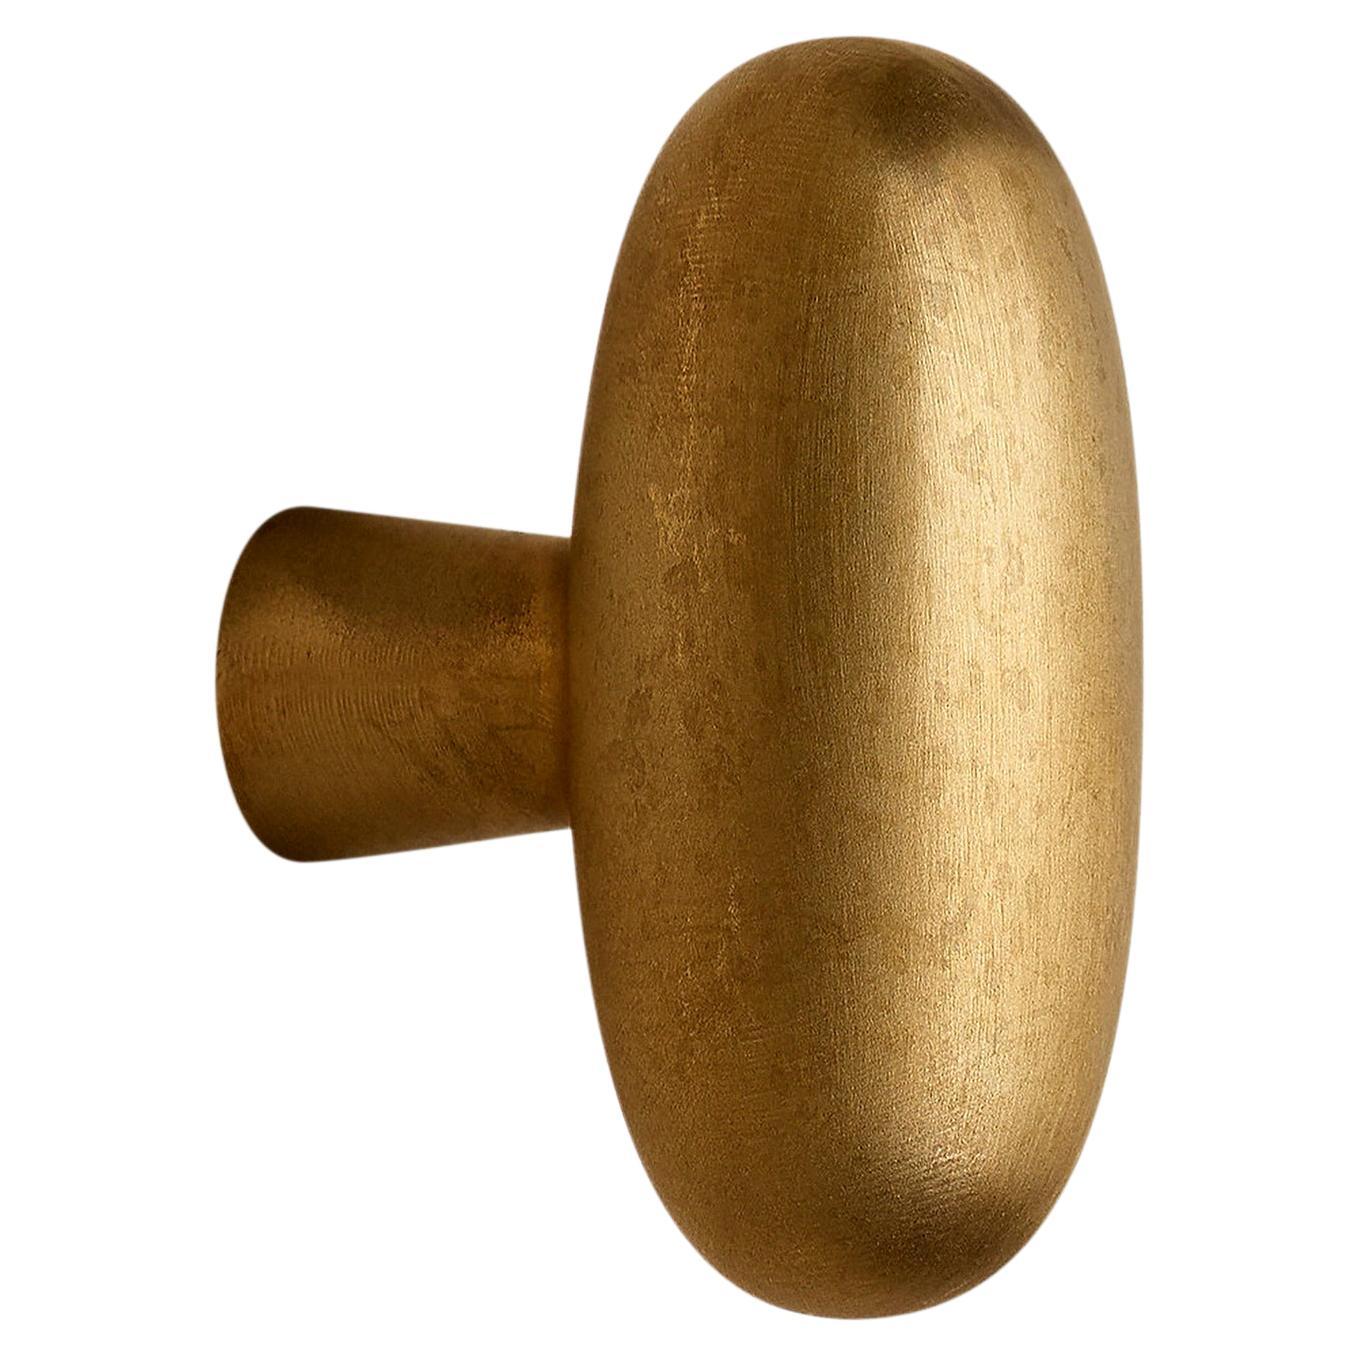 Contemporary Door Handle / Knob 'Blunt' by Spaces Within, Amber Brass For Sale